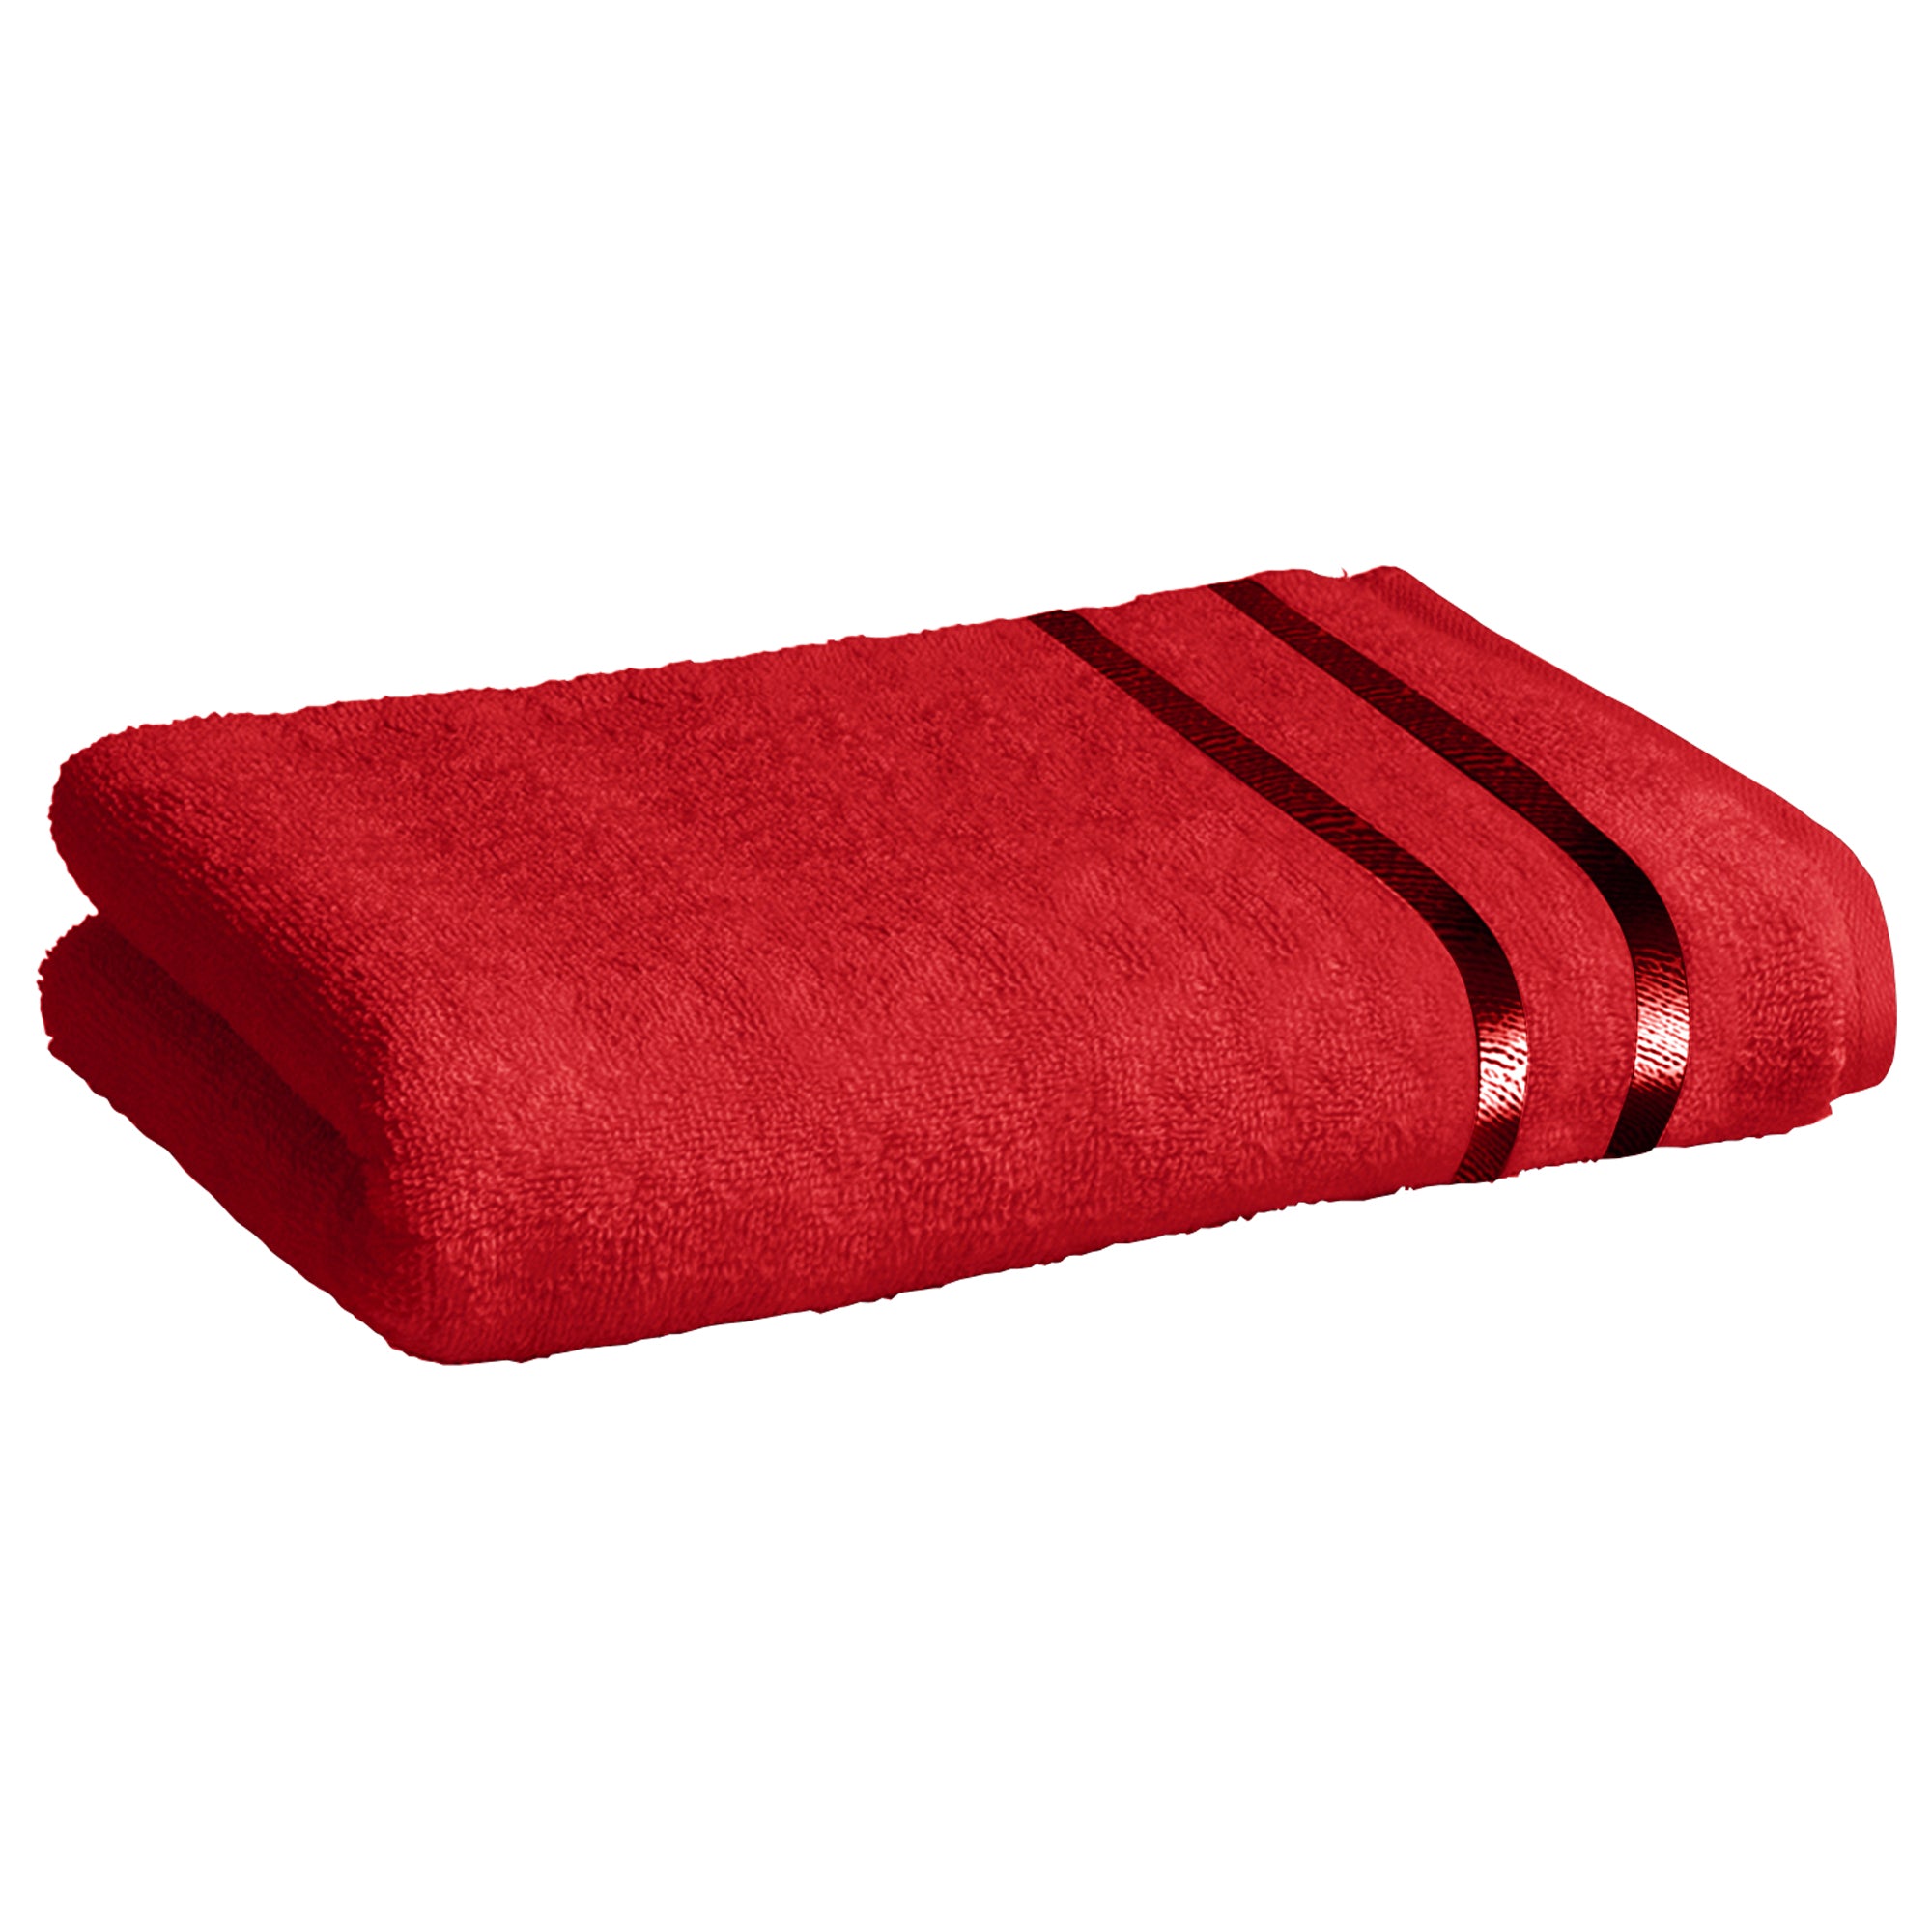 Story@Home 2 Units 100% Cotton Bath Towels - Blue and Wine Red